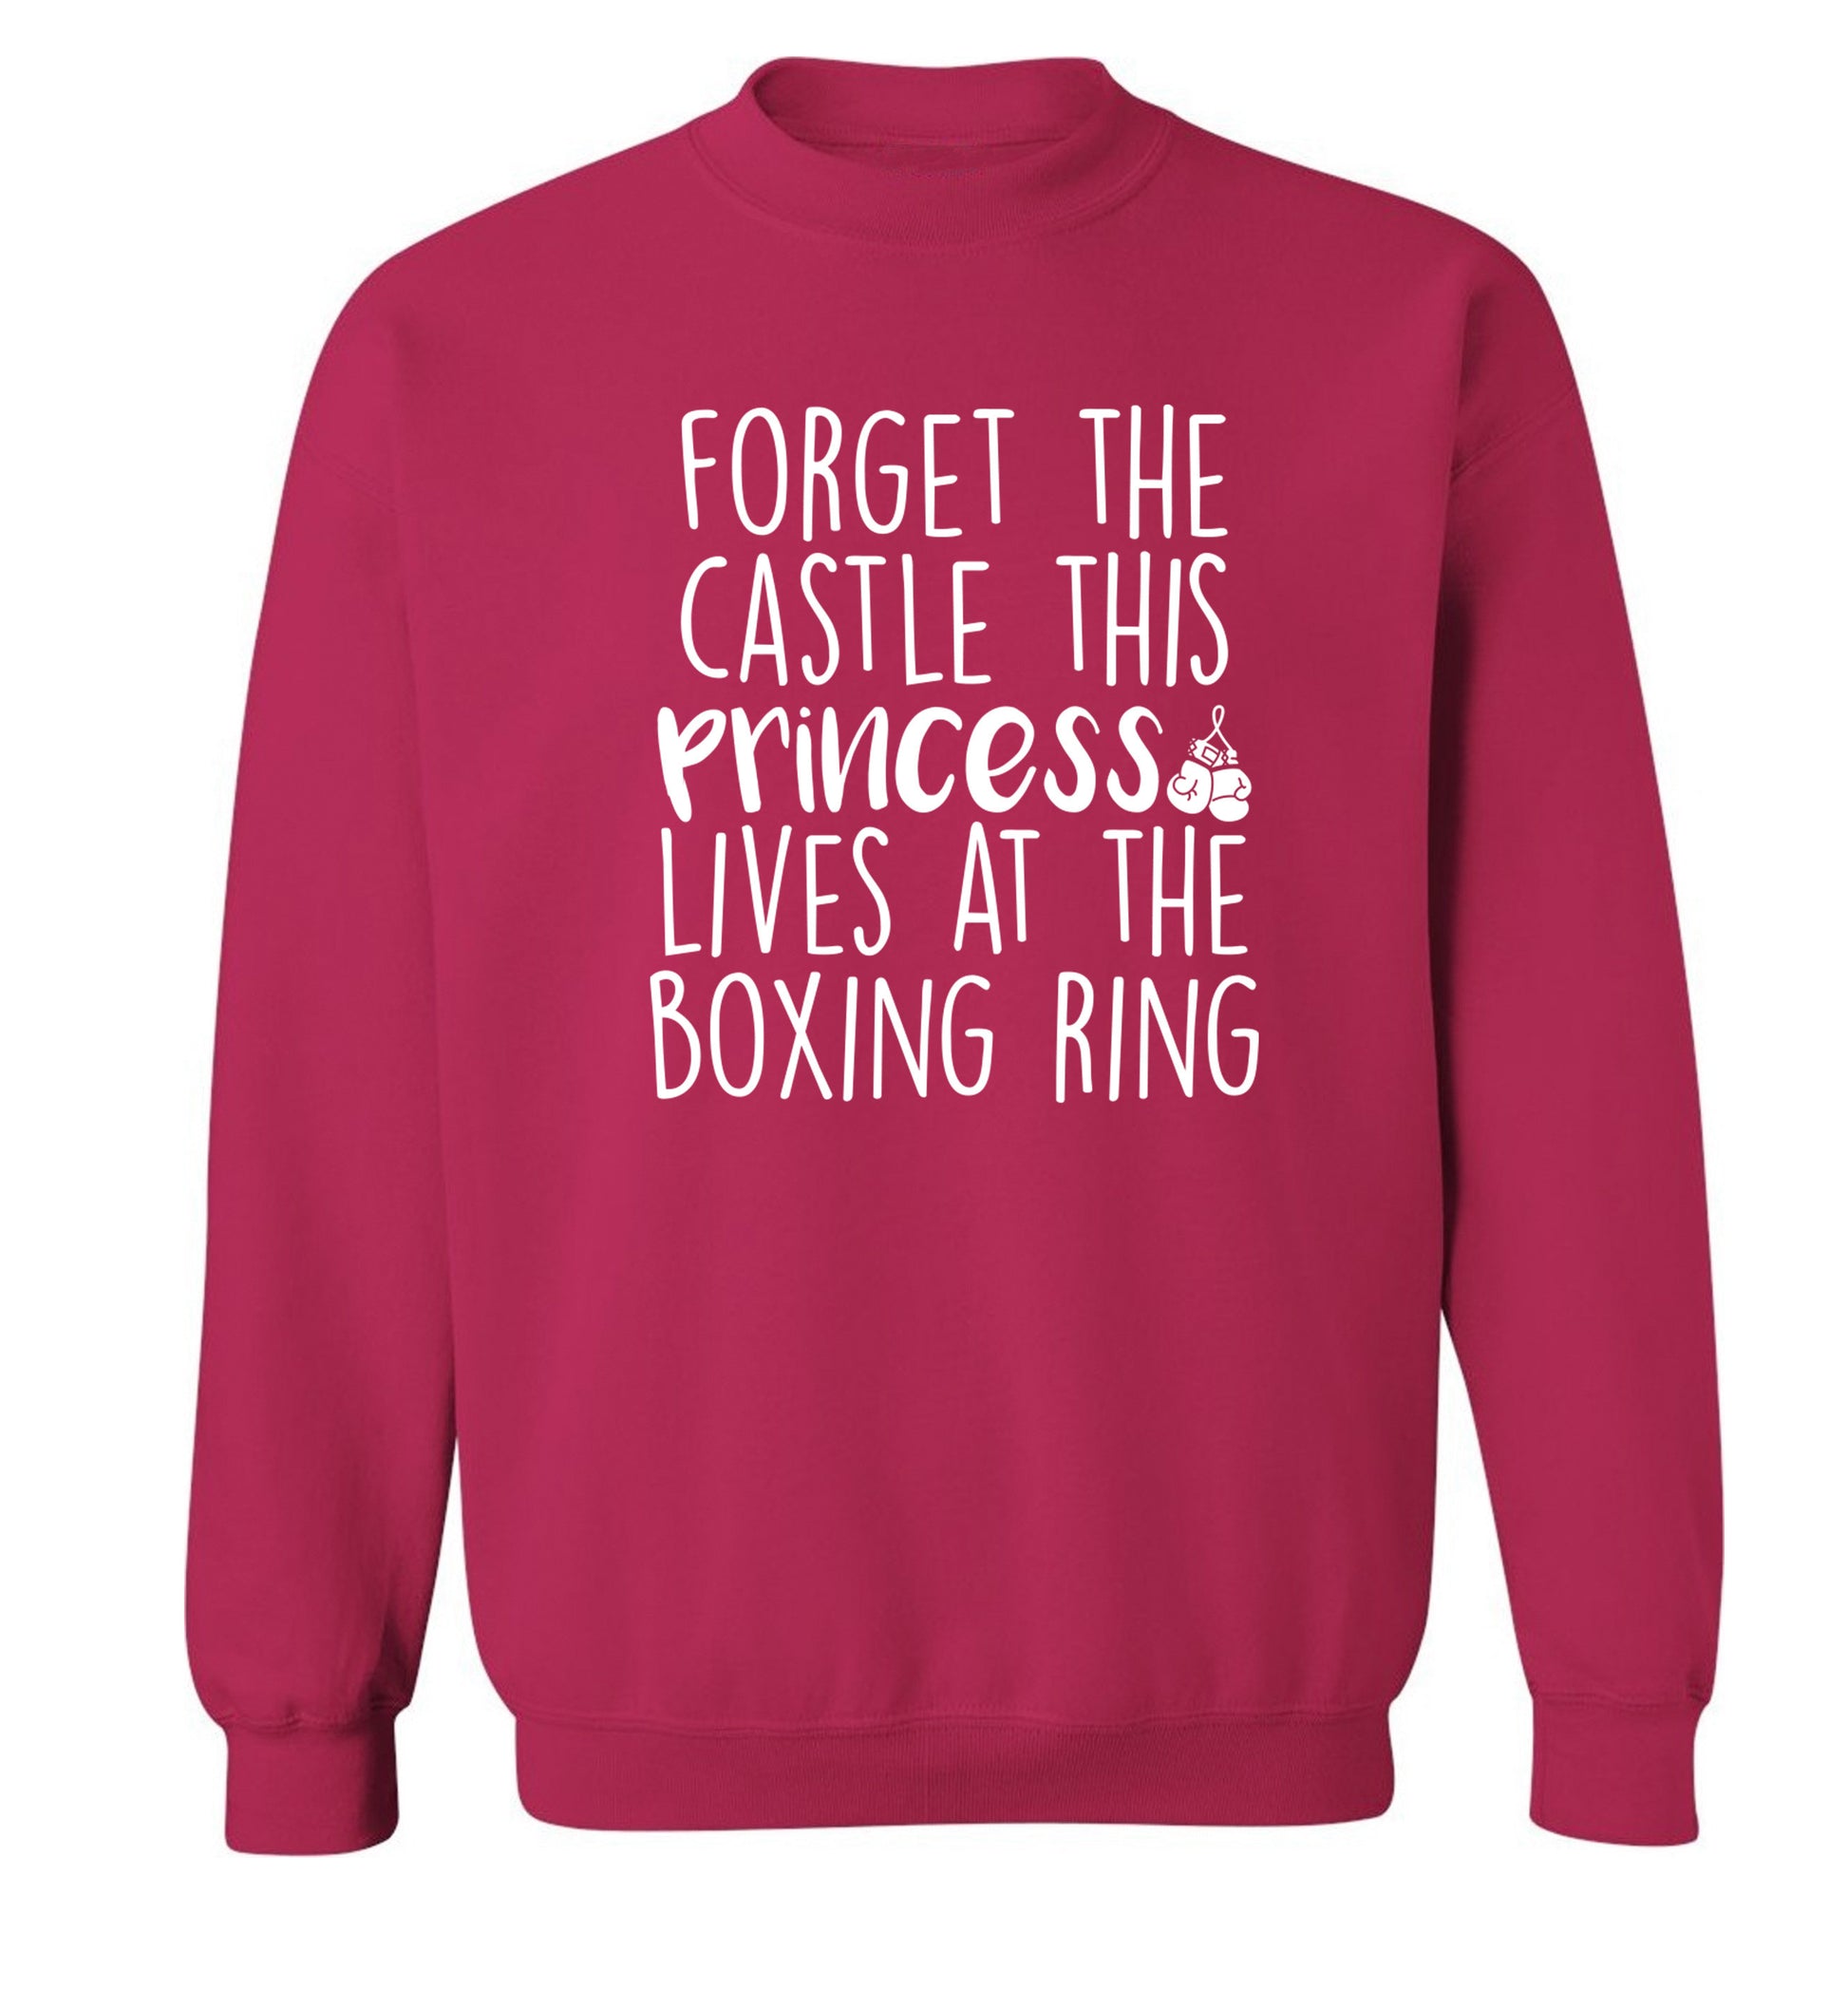 Forget the castle this princess lives at the boxing ring Adult's unisex pink Sweater 2XL